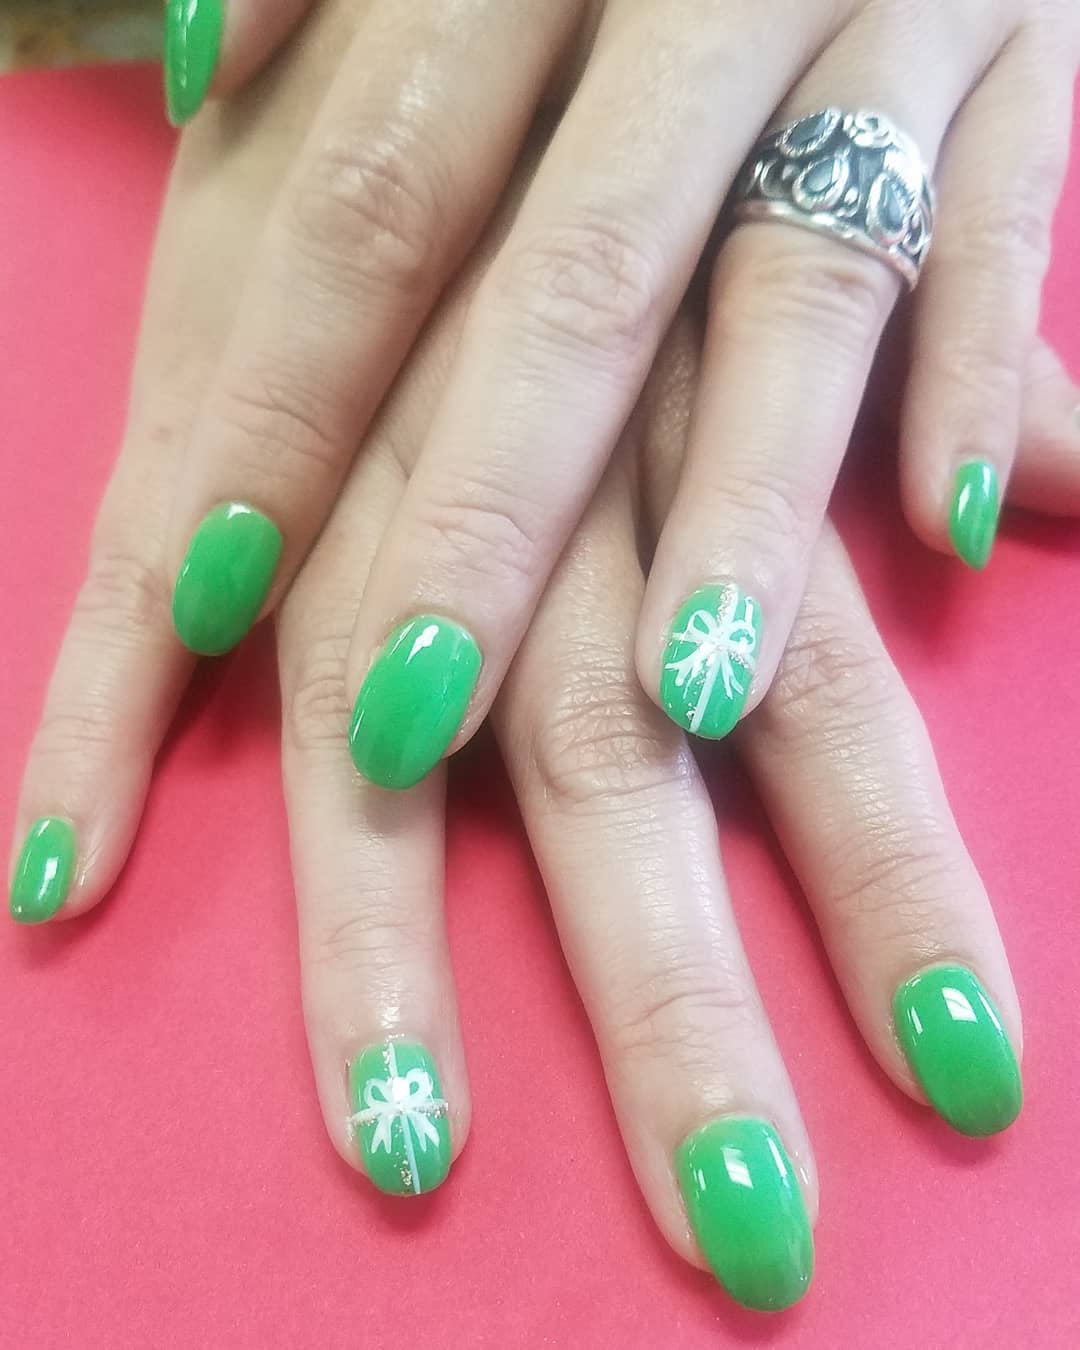 Marvelous green nails for Christmas party. Pic by _nailsby_amy_